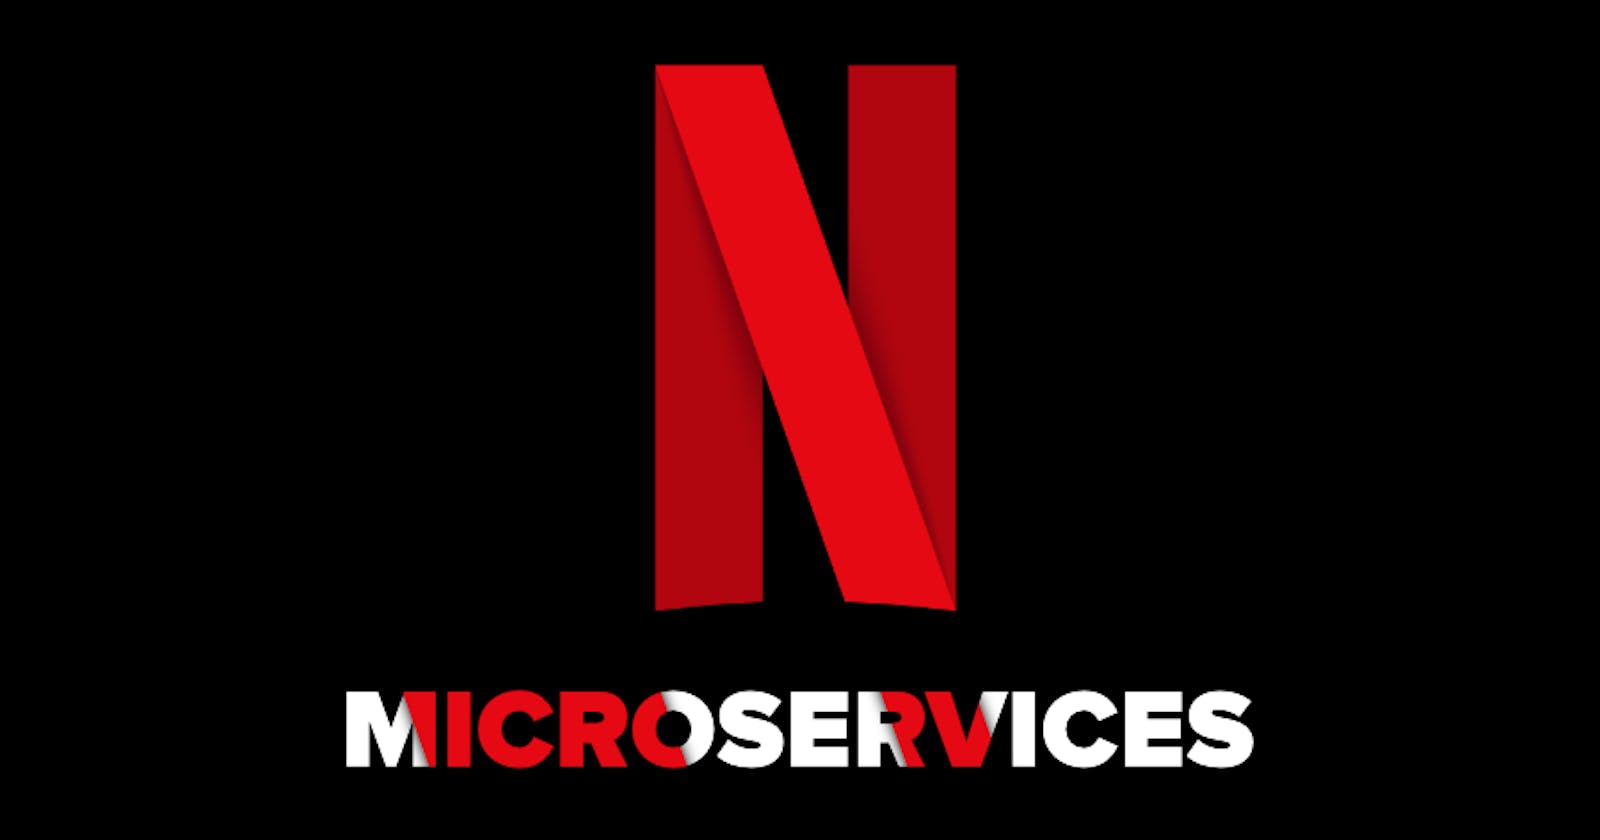 Netflix Guide to Microservices